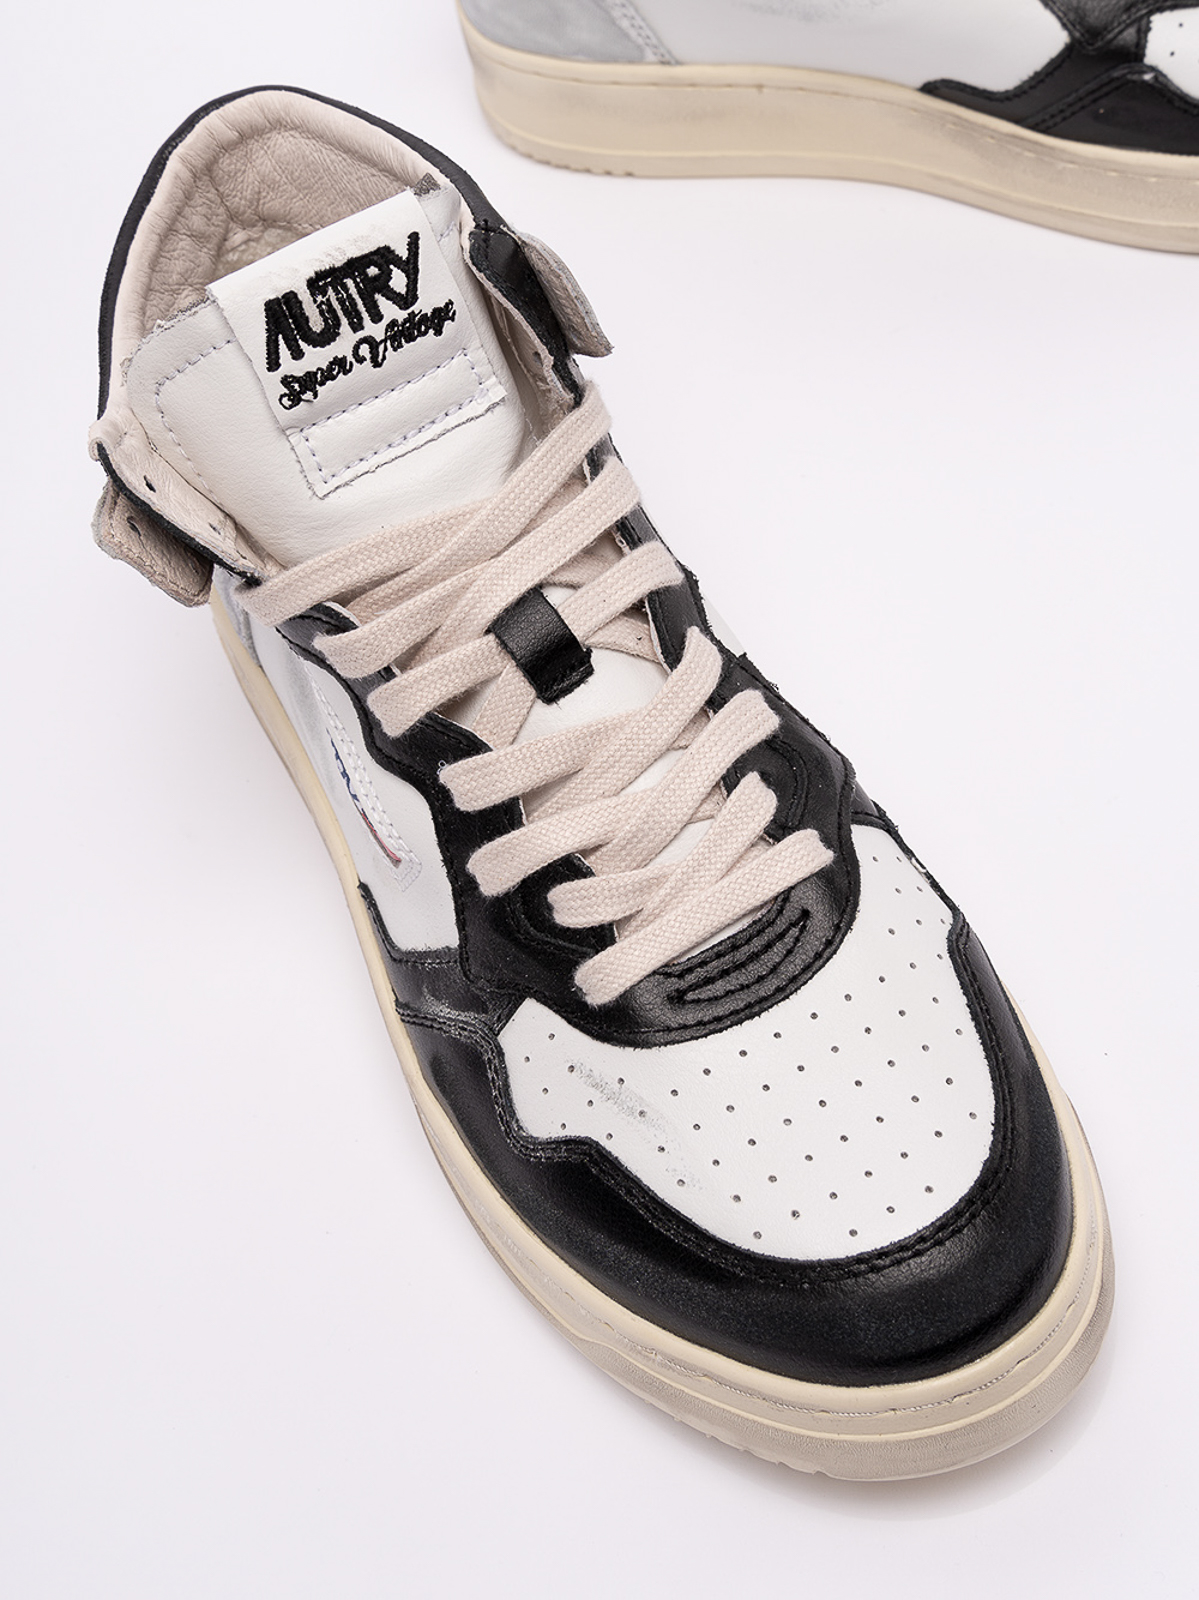 Trainers Autry - Sup Vint sneakers - AVMMSV11 | Shop online at iKRIX